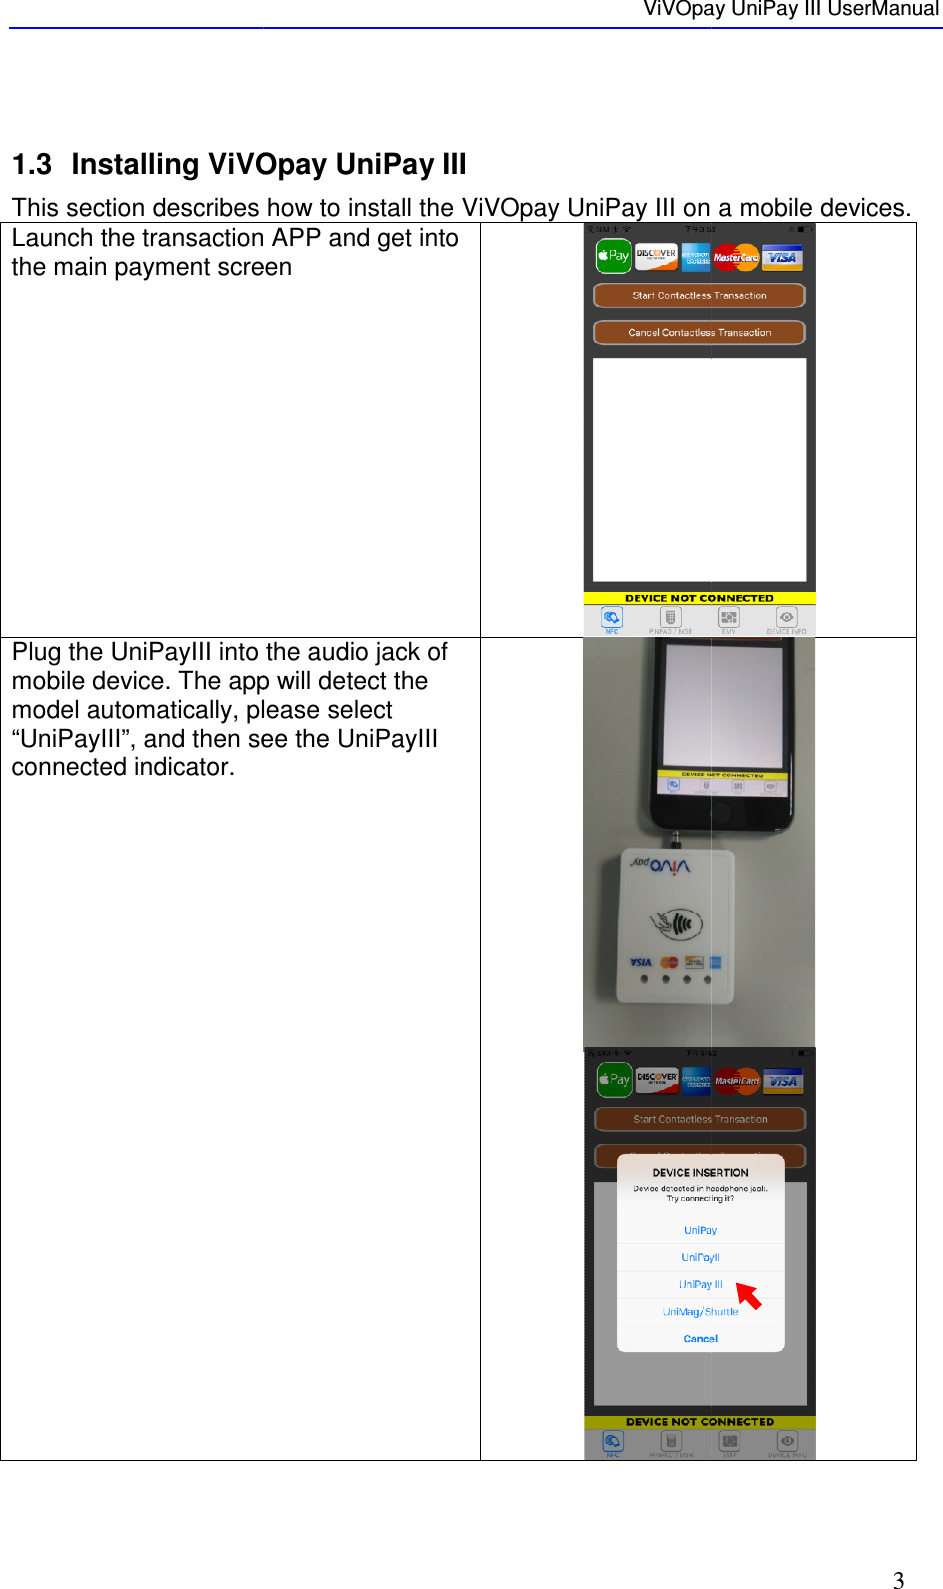       1.3 Installing ViVOpay This section describes how to install the ViVOpay Launch the transaction APP and get into the main payment screen Plug the UniPayIII into the audio jack of mobile device. The app will detect the model automatically, please select “UniPayIII”, and then see the UniPayIII connected indicator. ViVOpay Installing ViVOpay UniPay III This section describes how to install the ViVOpay UniPay III on a mobile devicesLaunch the transaction APP and get into the main payment screen  Plug the UniPayIII into the audio jack of mobile device. The app will detect the model automatically, please select “UniPayIII”, and then see the UniPayIII ViVOpay UniPay III UserManual 3 on a mobile devices.   